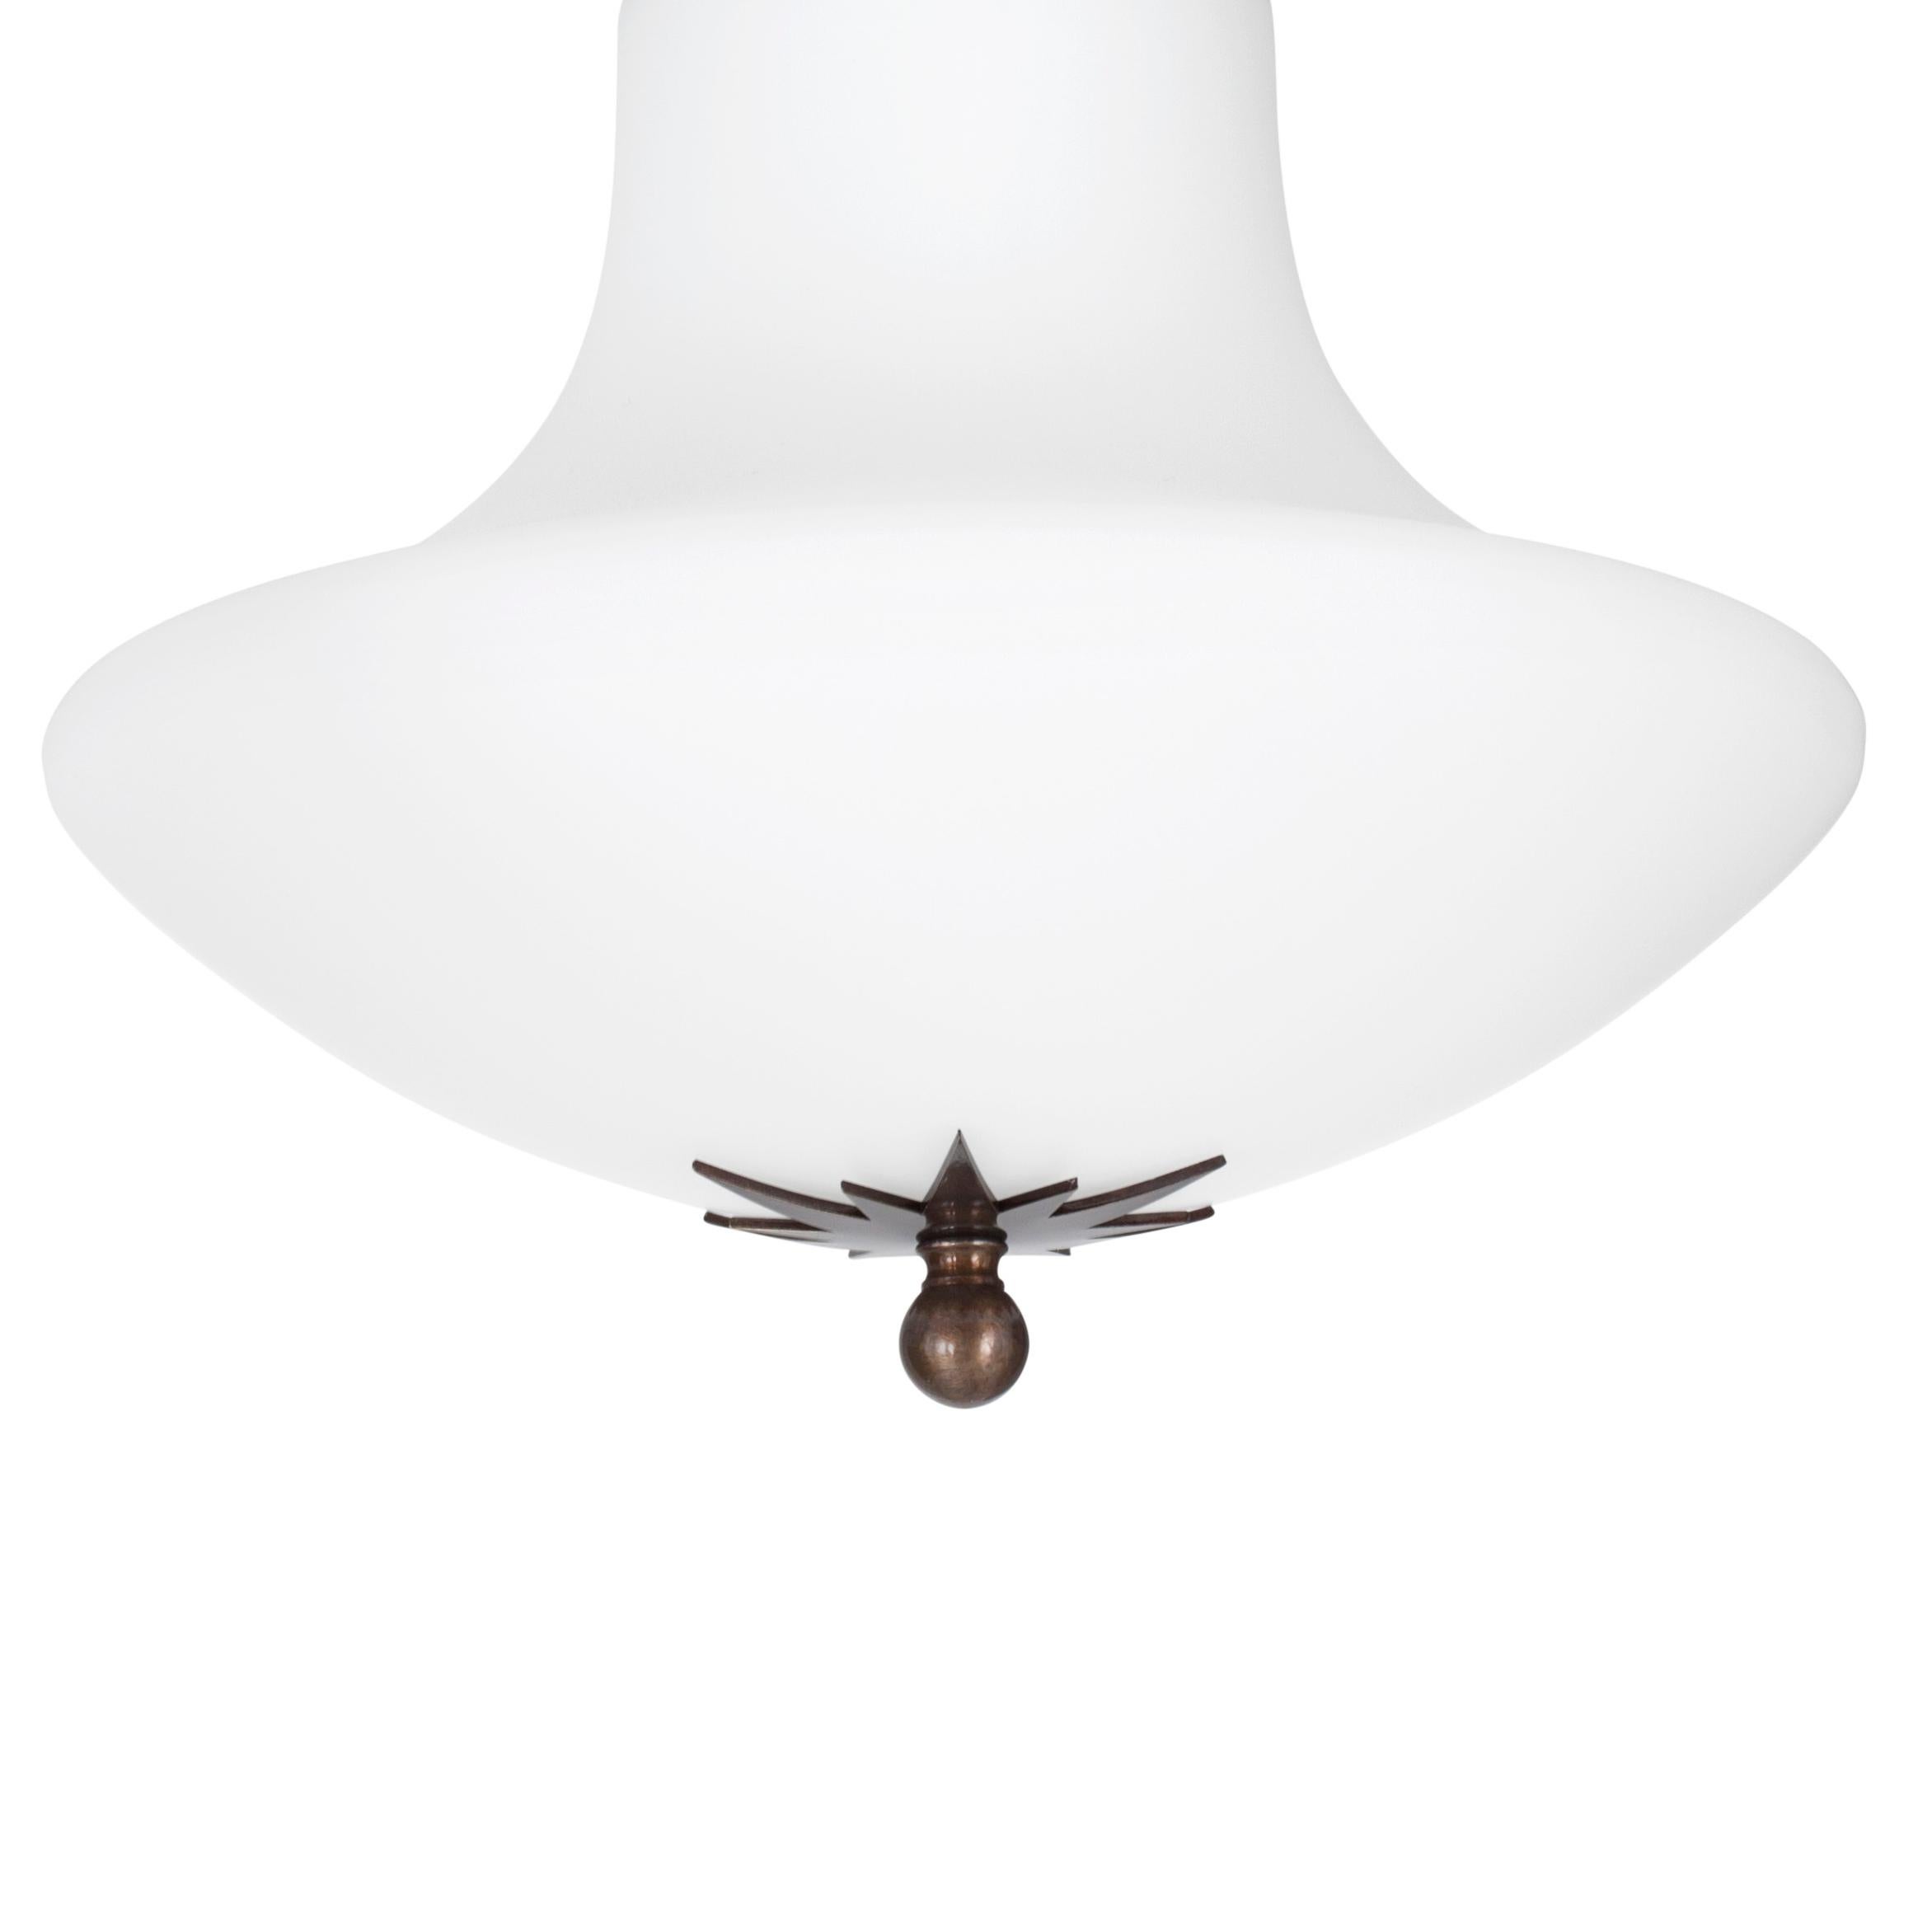 Ceiling lamp model Stoby designed by Konsthantverk and manufactured by themselves. 
A true Art Nouveau classic in white matte opal glass and oxidized brass.
Comes in a number of different sizes.

The production of lamps, wall lights and floor